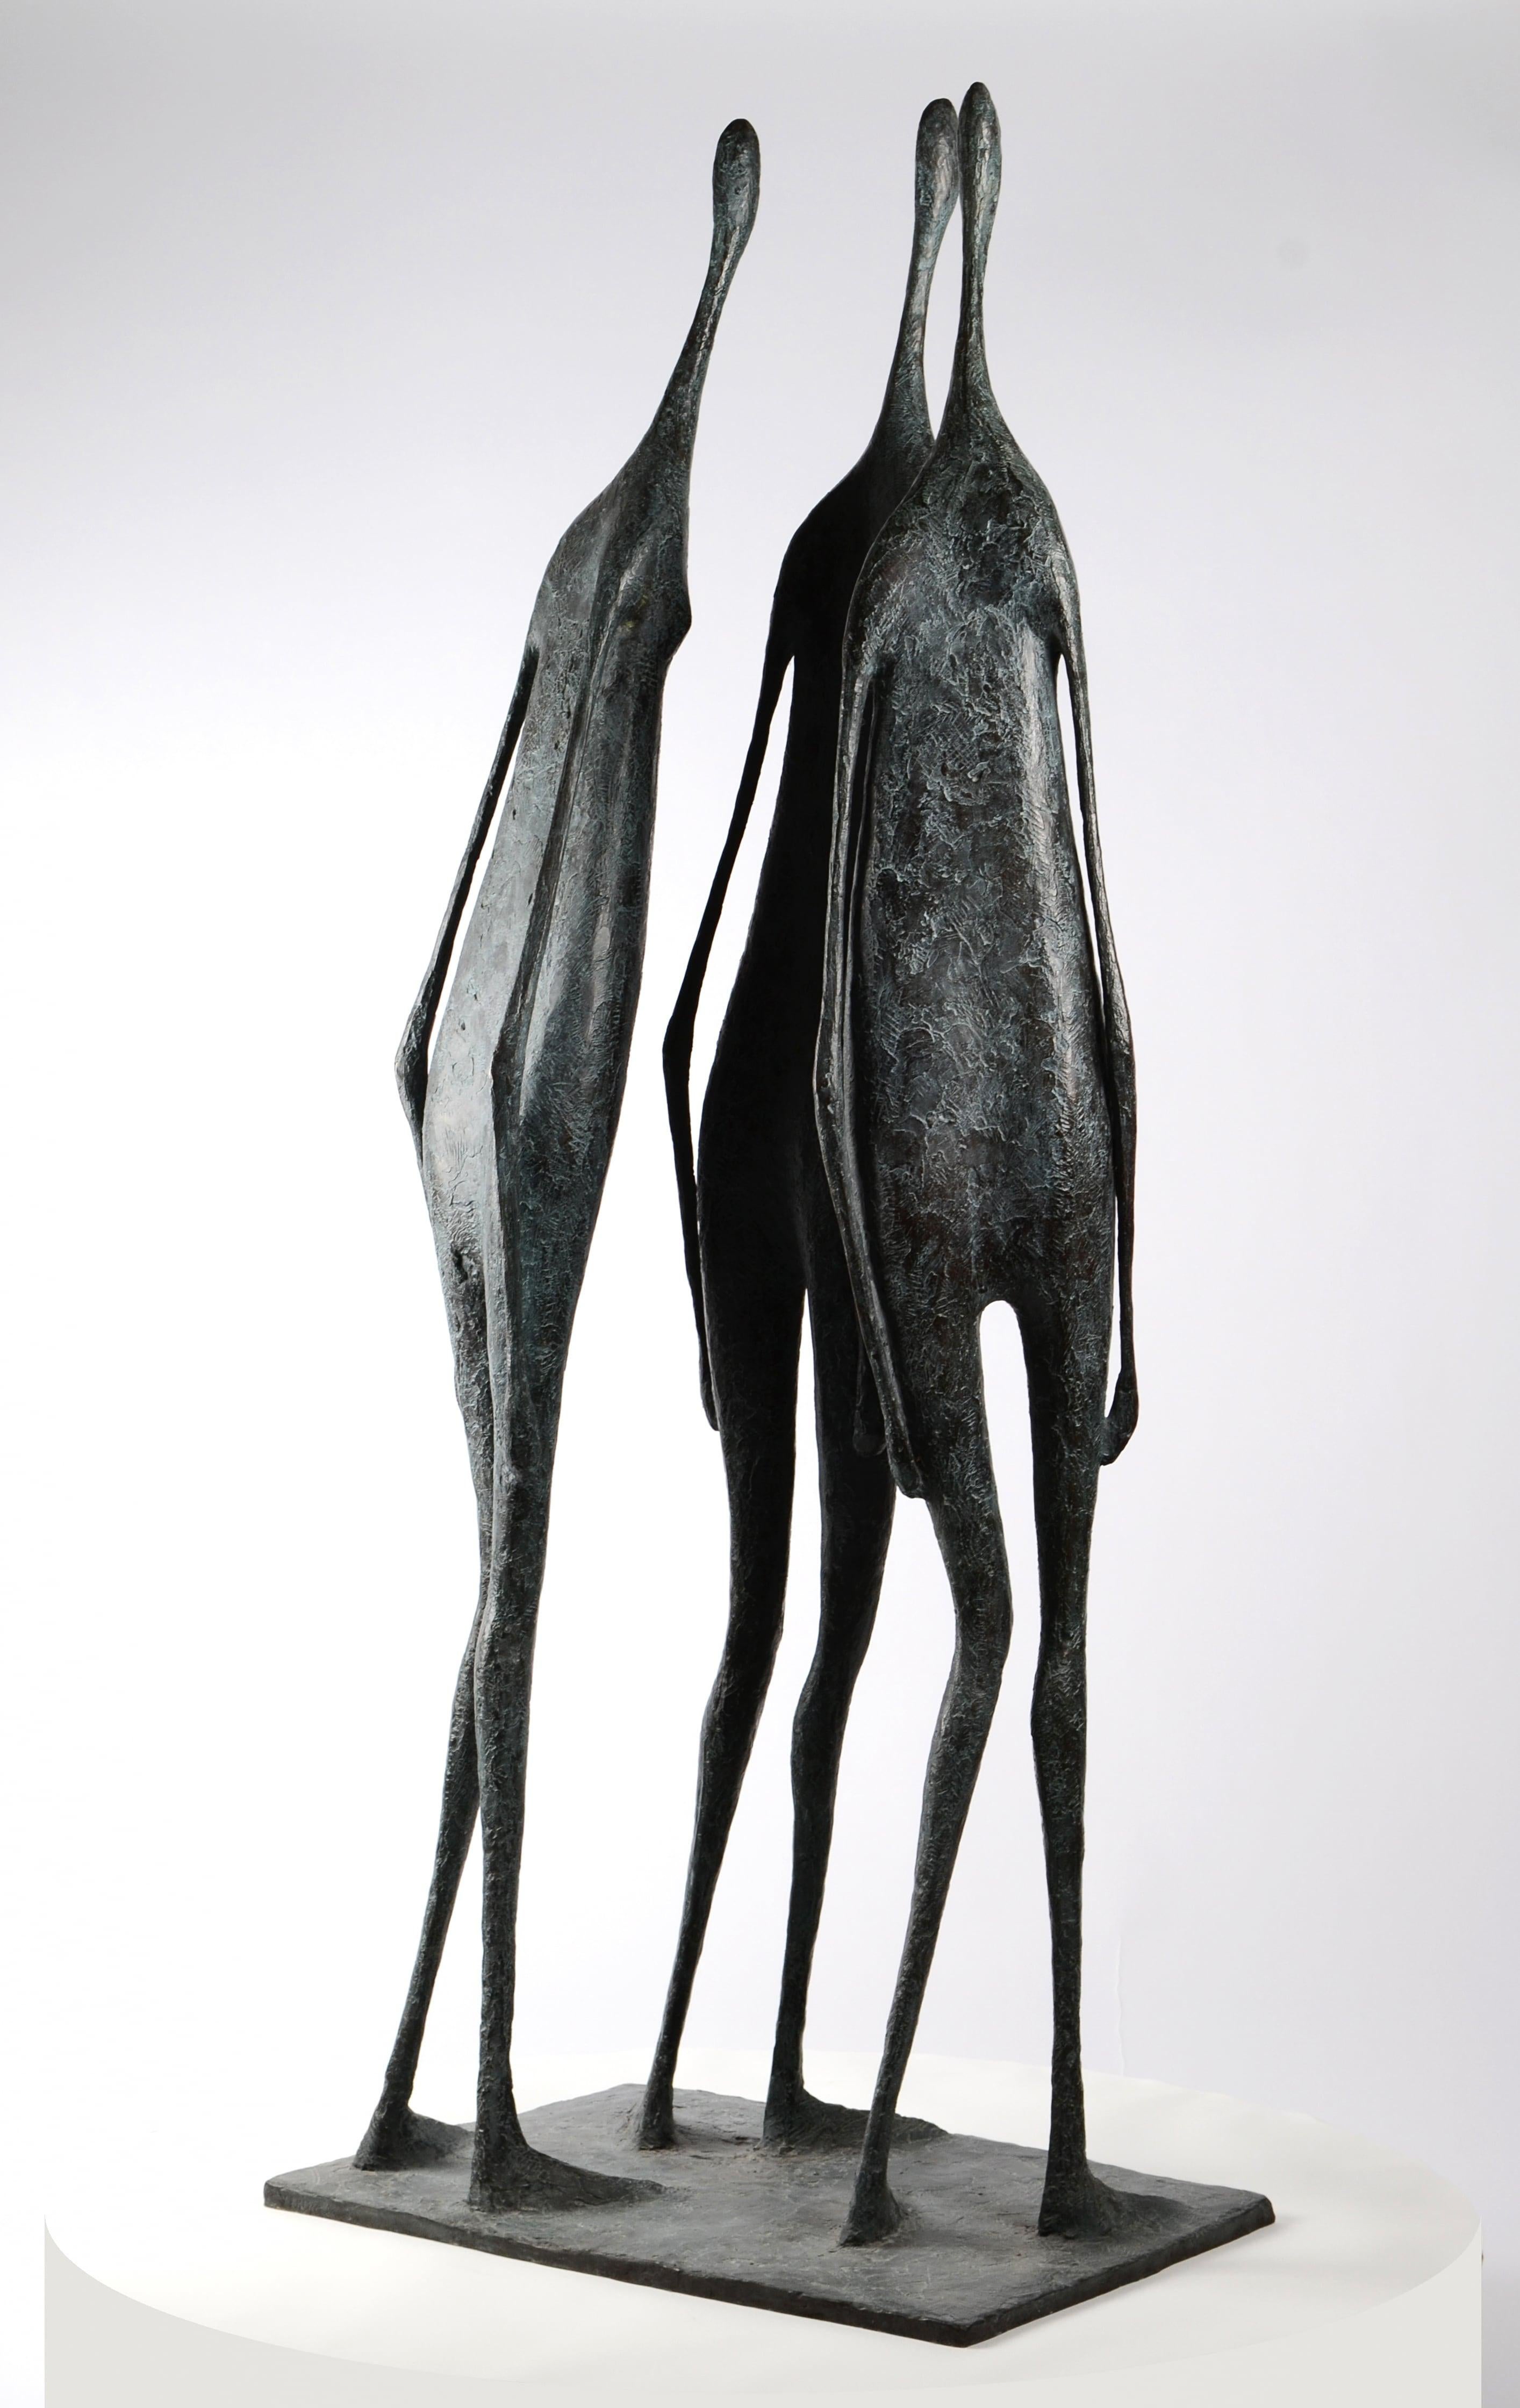 3 Large Standing Figures I - Bronze Group of Three Figures - Contemporary Sculpture by Pierre Yermia